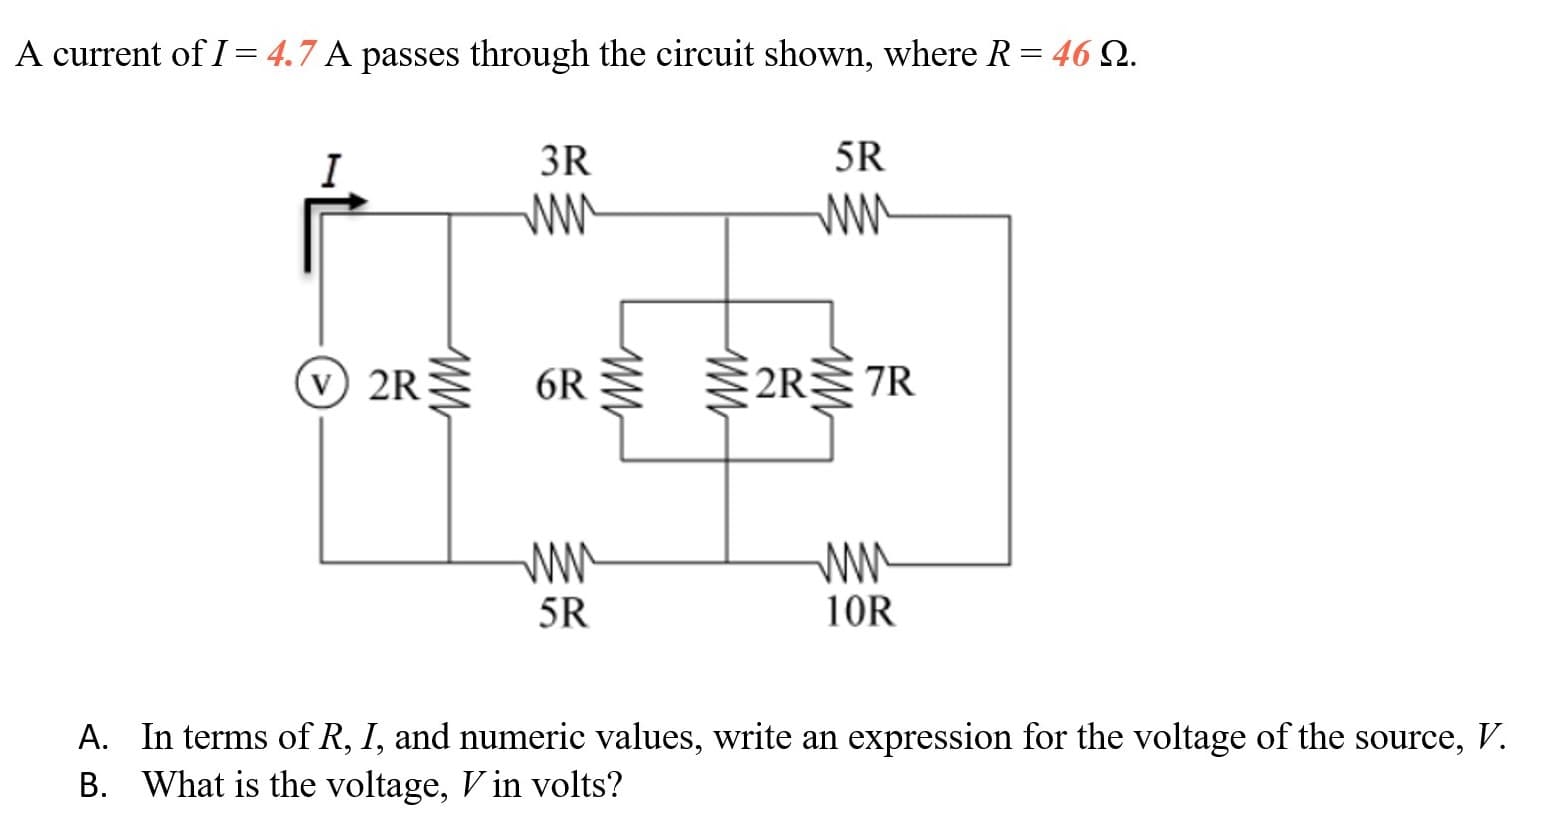 A current of I = 4.7 A passes through the circuit shown, where R = 46 Q.
I
3R
5R
ww
ww
2R 6R §2RR
ww
10R
5R
A. In terms of R, I, and numeric values, write an expression for the voltage of the source, V.
B. What is the voltage, V in volts?
